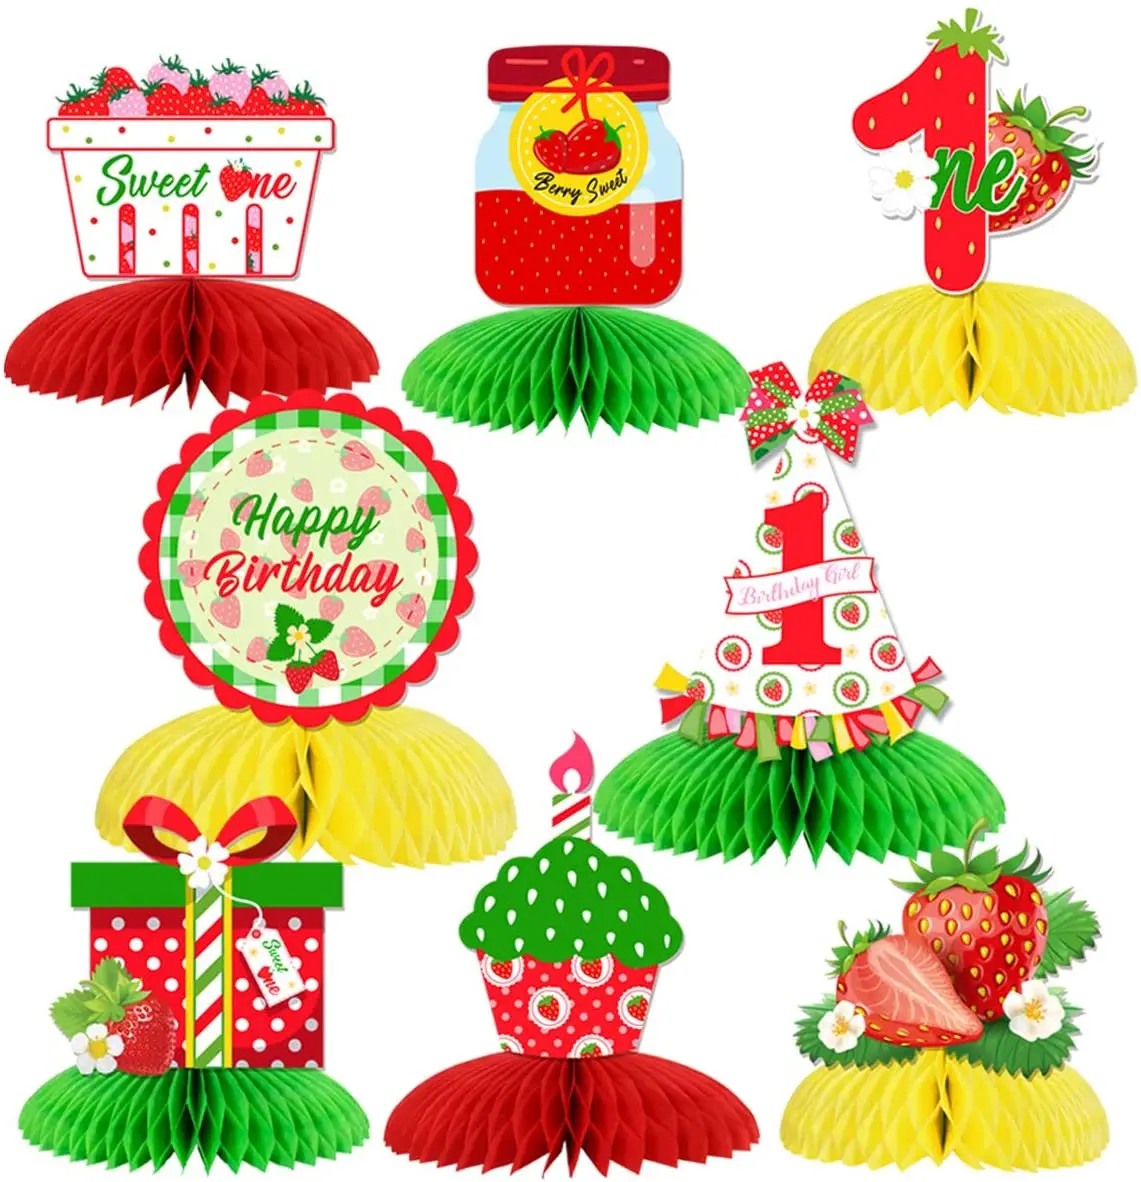 

SURSURPIRSE-Strawberry Themed Party Decorations, Sweet One Honeycomb Centerpieces, 3D Fruit Table, 1st Birthday Supplies